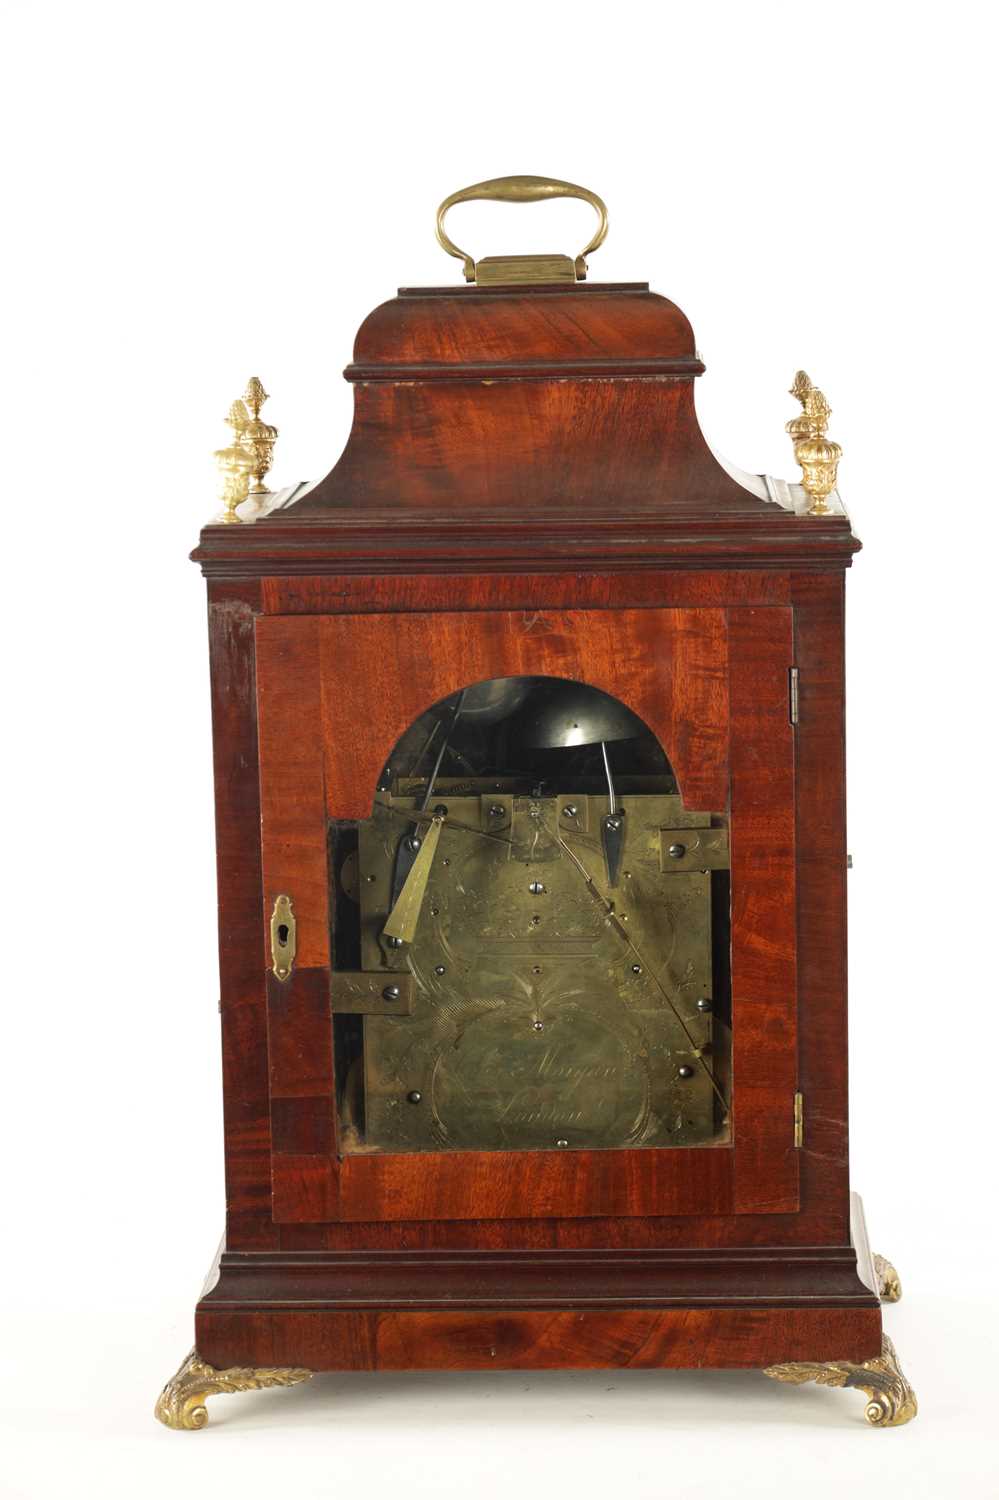 CHARLES MORGAN, LONDON. NO. 2680. A GEORGE III QUARTER CHIMING VERGE BRACKET CLOCK WITH CALENDAR AND - Image 7 of 14